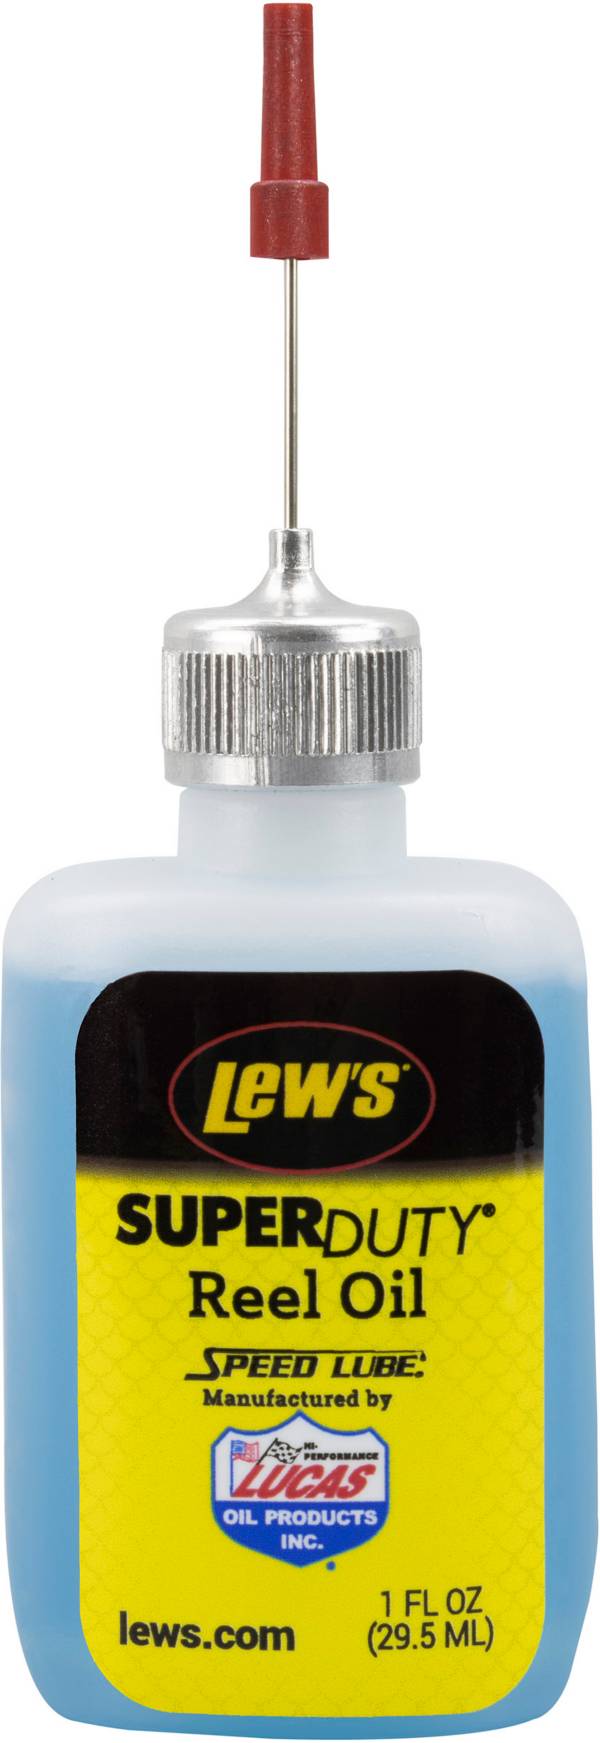 Lew's Super Duty Reel Oil product image